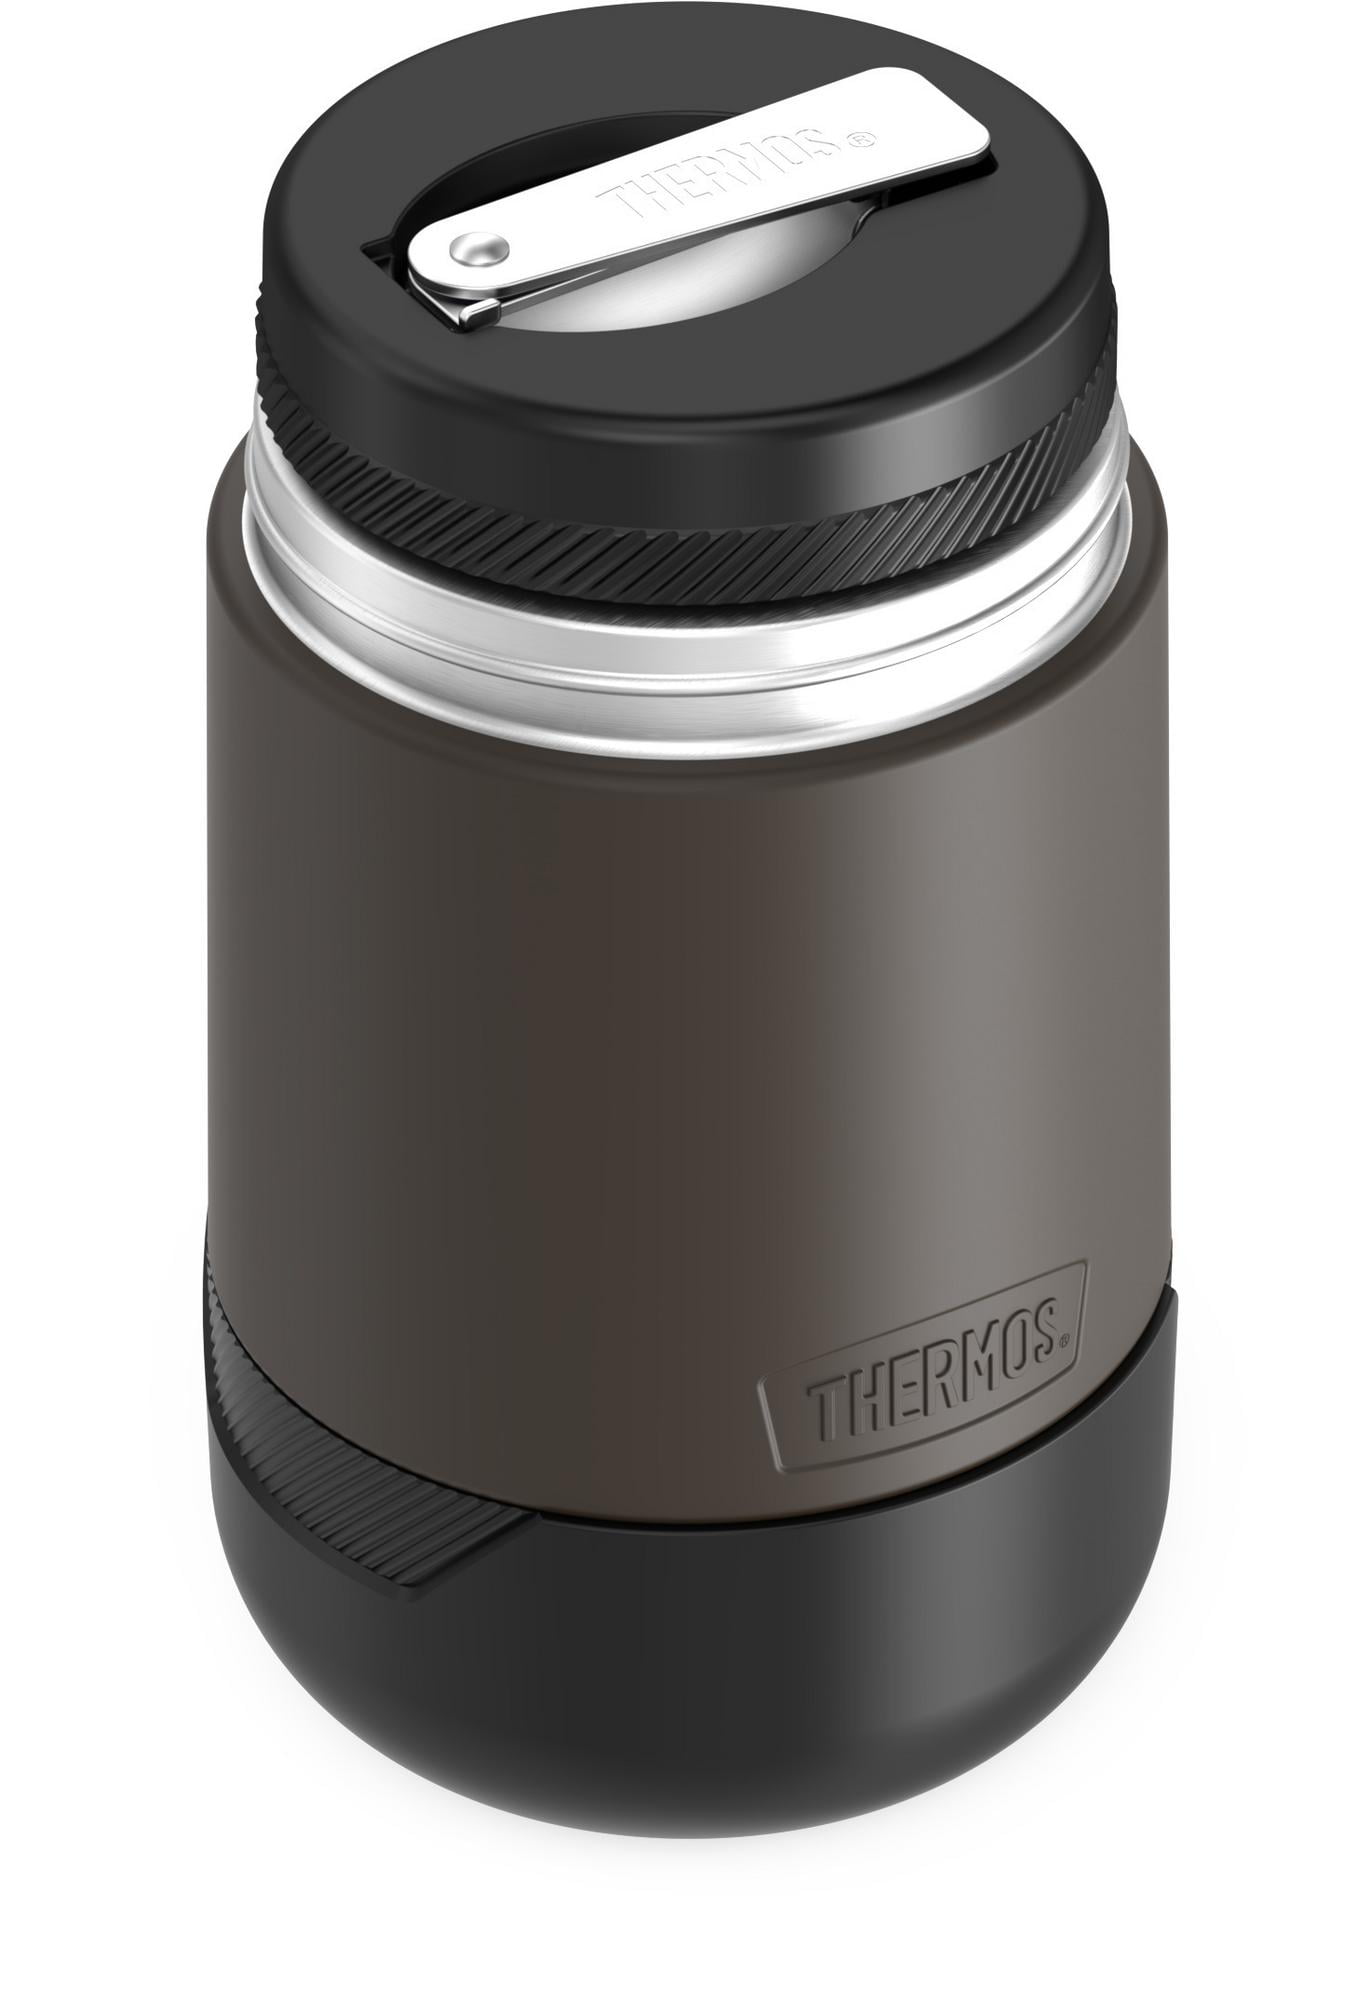 Thermos LLC Stainless Steel Food Jar with Spoon- Graphite, 24 oz - Kroger